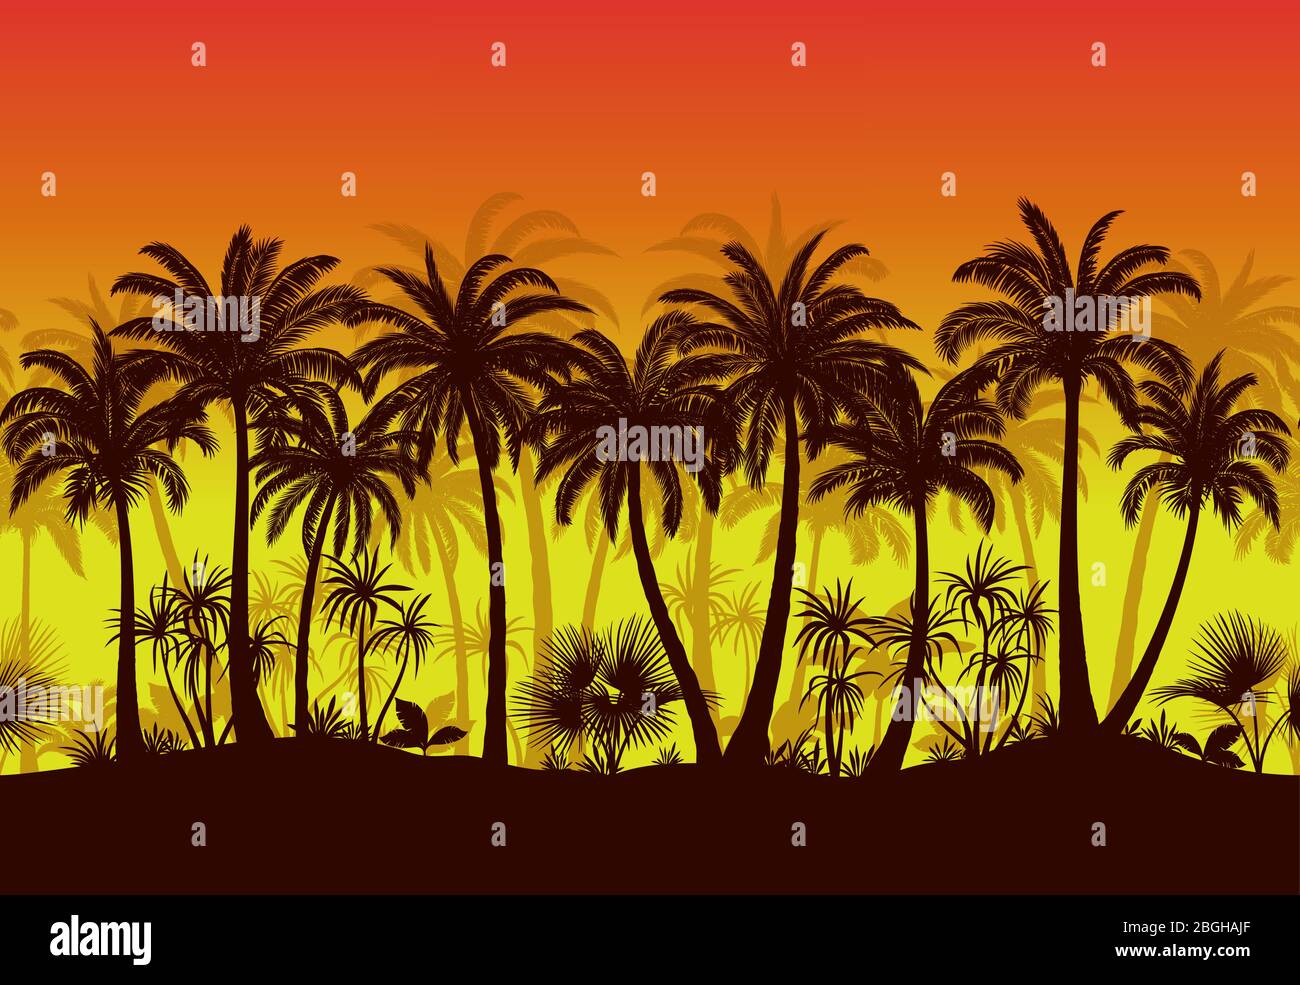 Exotic Horizontal Seamless Landscape, Palm Trees and Tropical Plants Black Silhouettes on Orange and Yellow Background. Vector Stock Vector